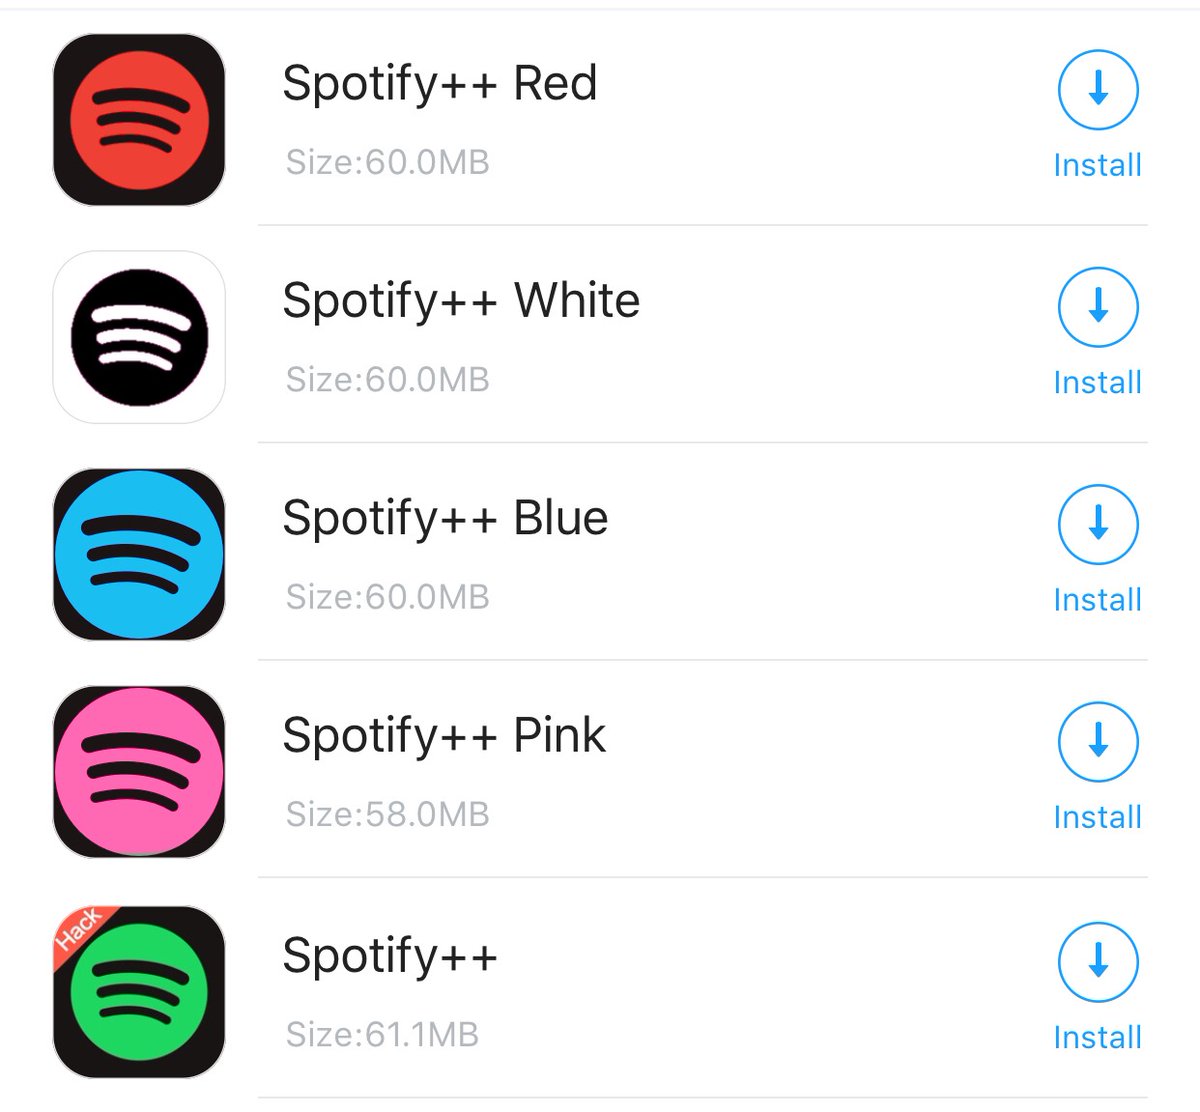 Download Spotify++ In Colorful Theme:Blue/Pink/White/Red
avere Spotify colorato